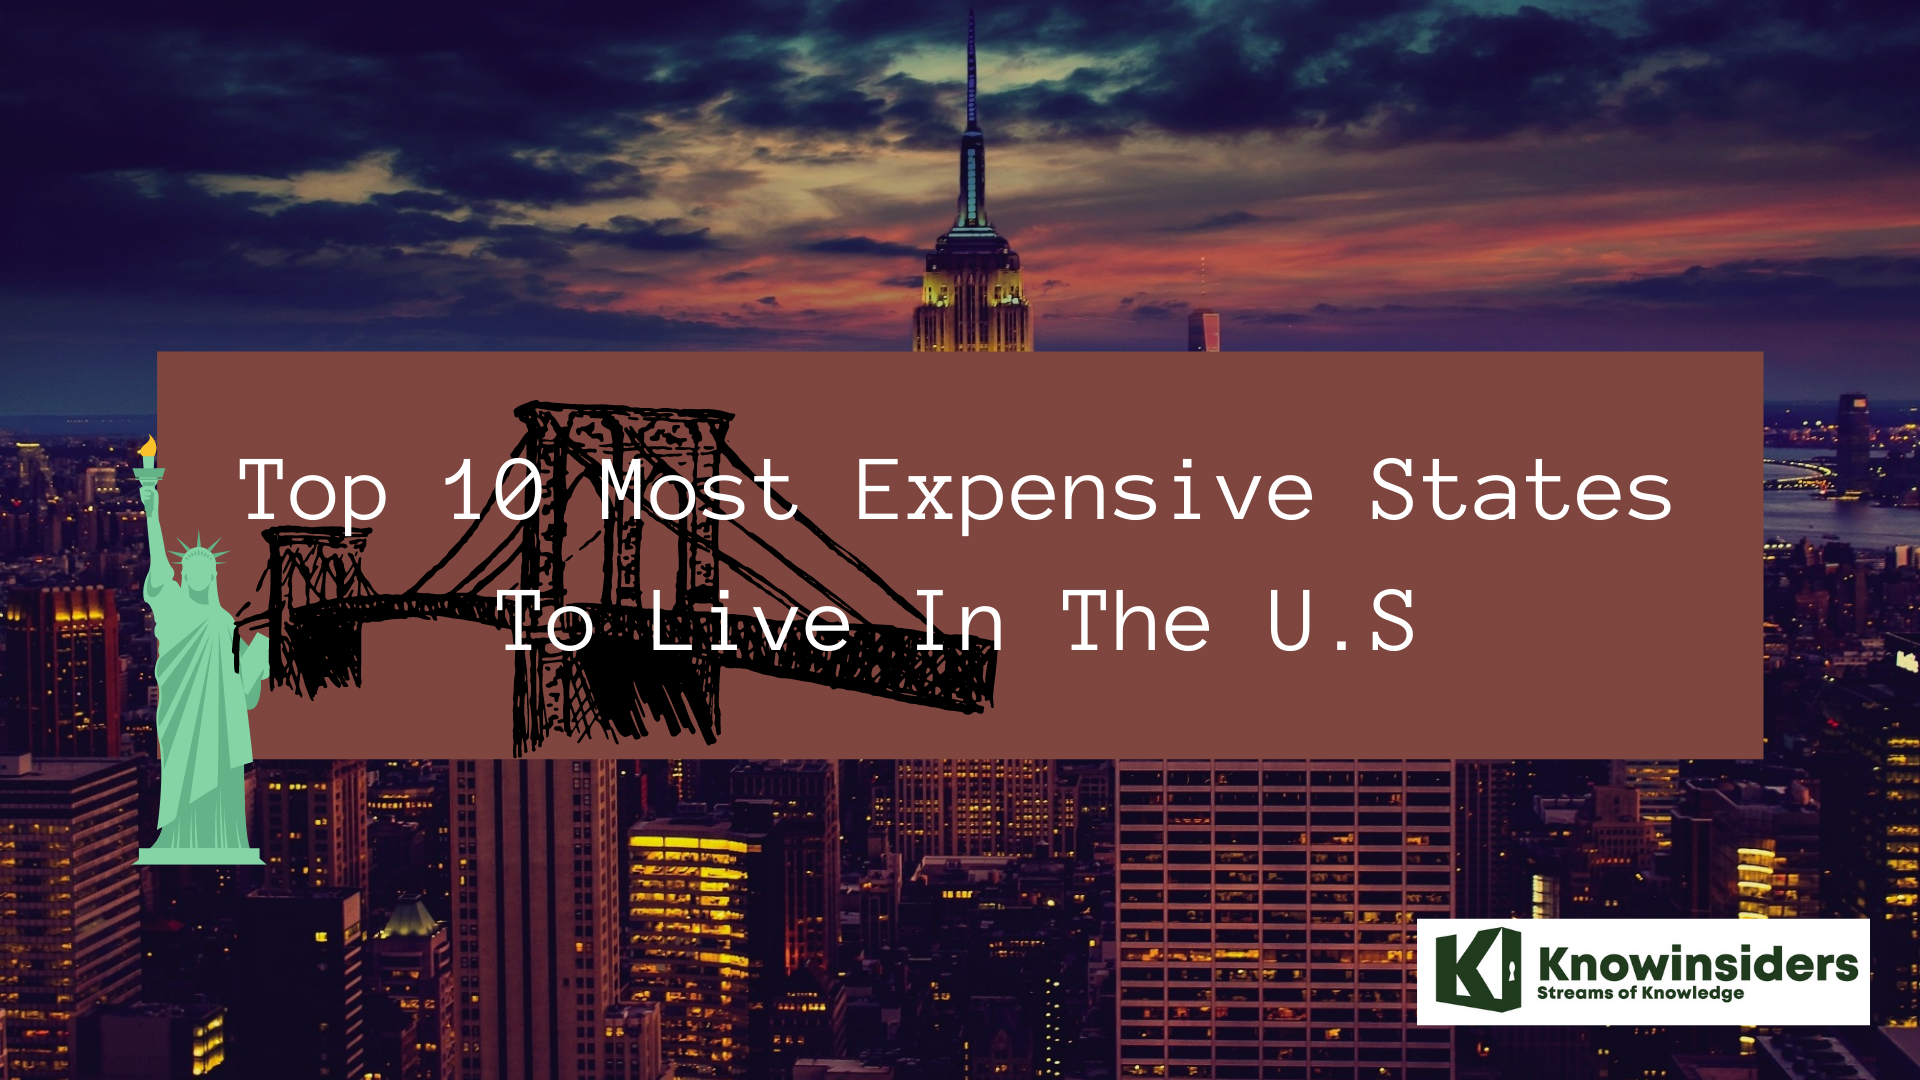 Top 10 Most Expensive States To Live In The U.S